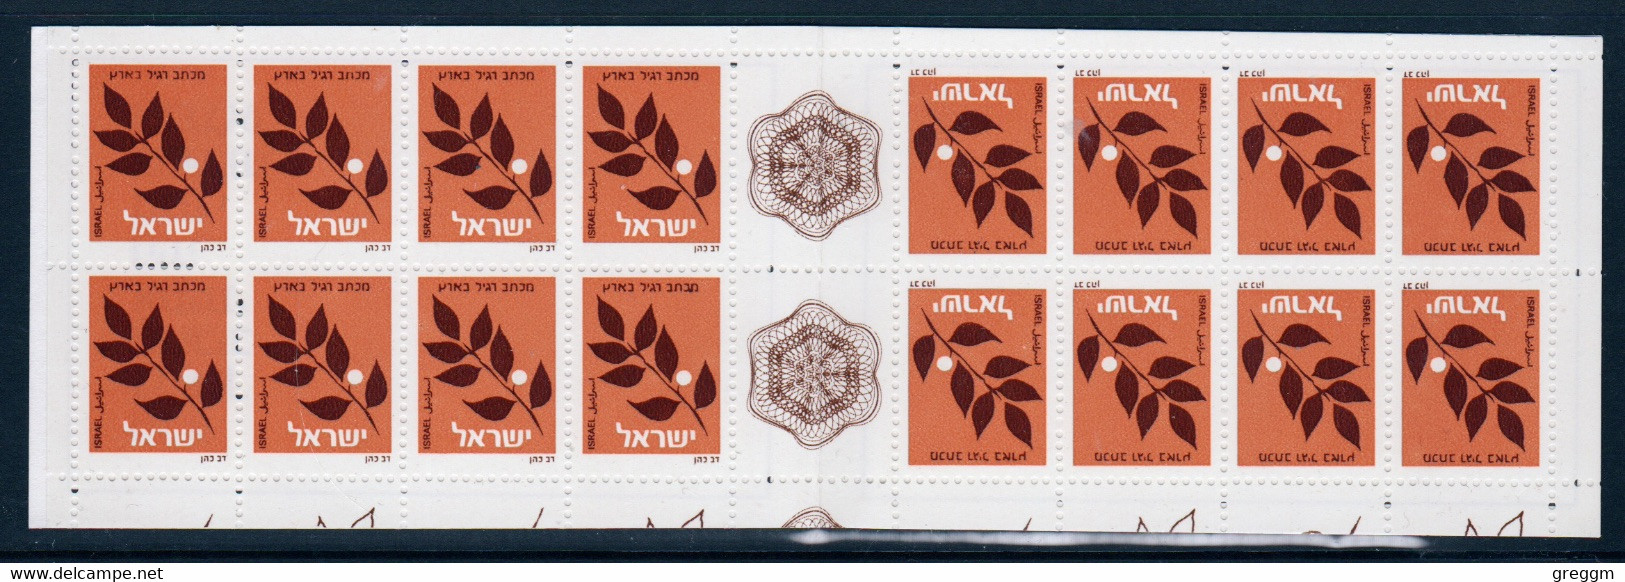 Israel 1982 Booklet Containing 16 Definitive Stamps In Unmounted Mint - Carnets